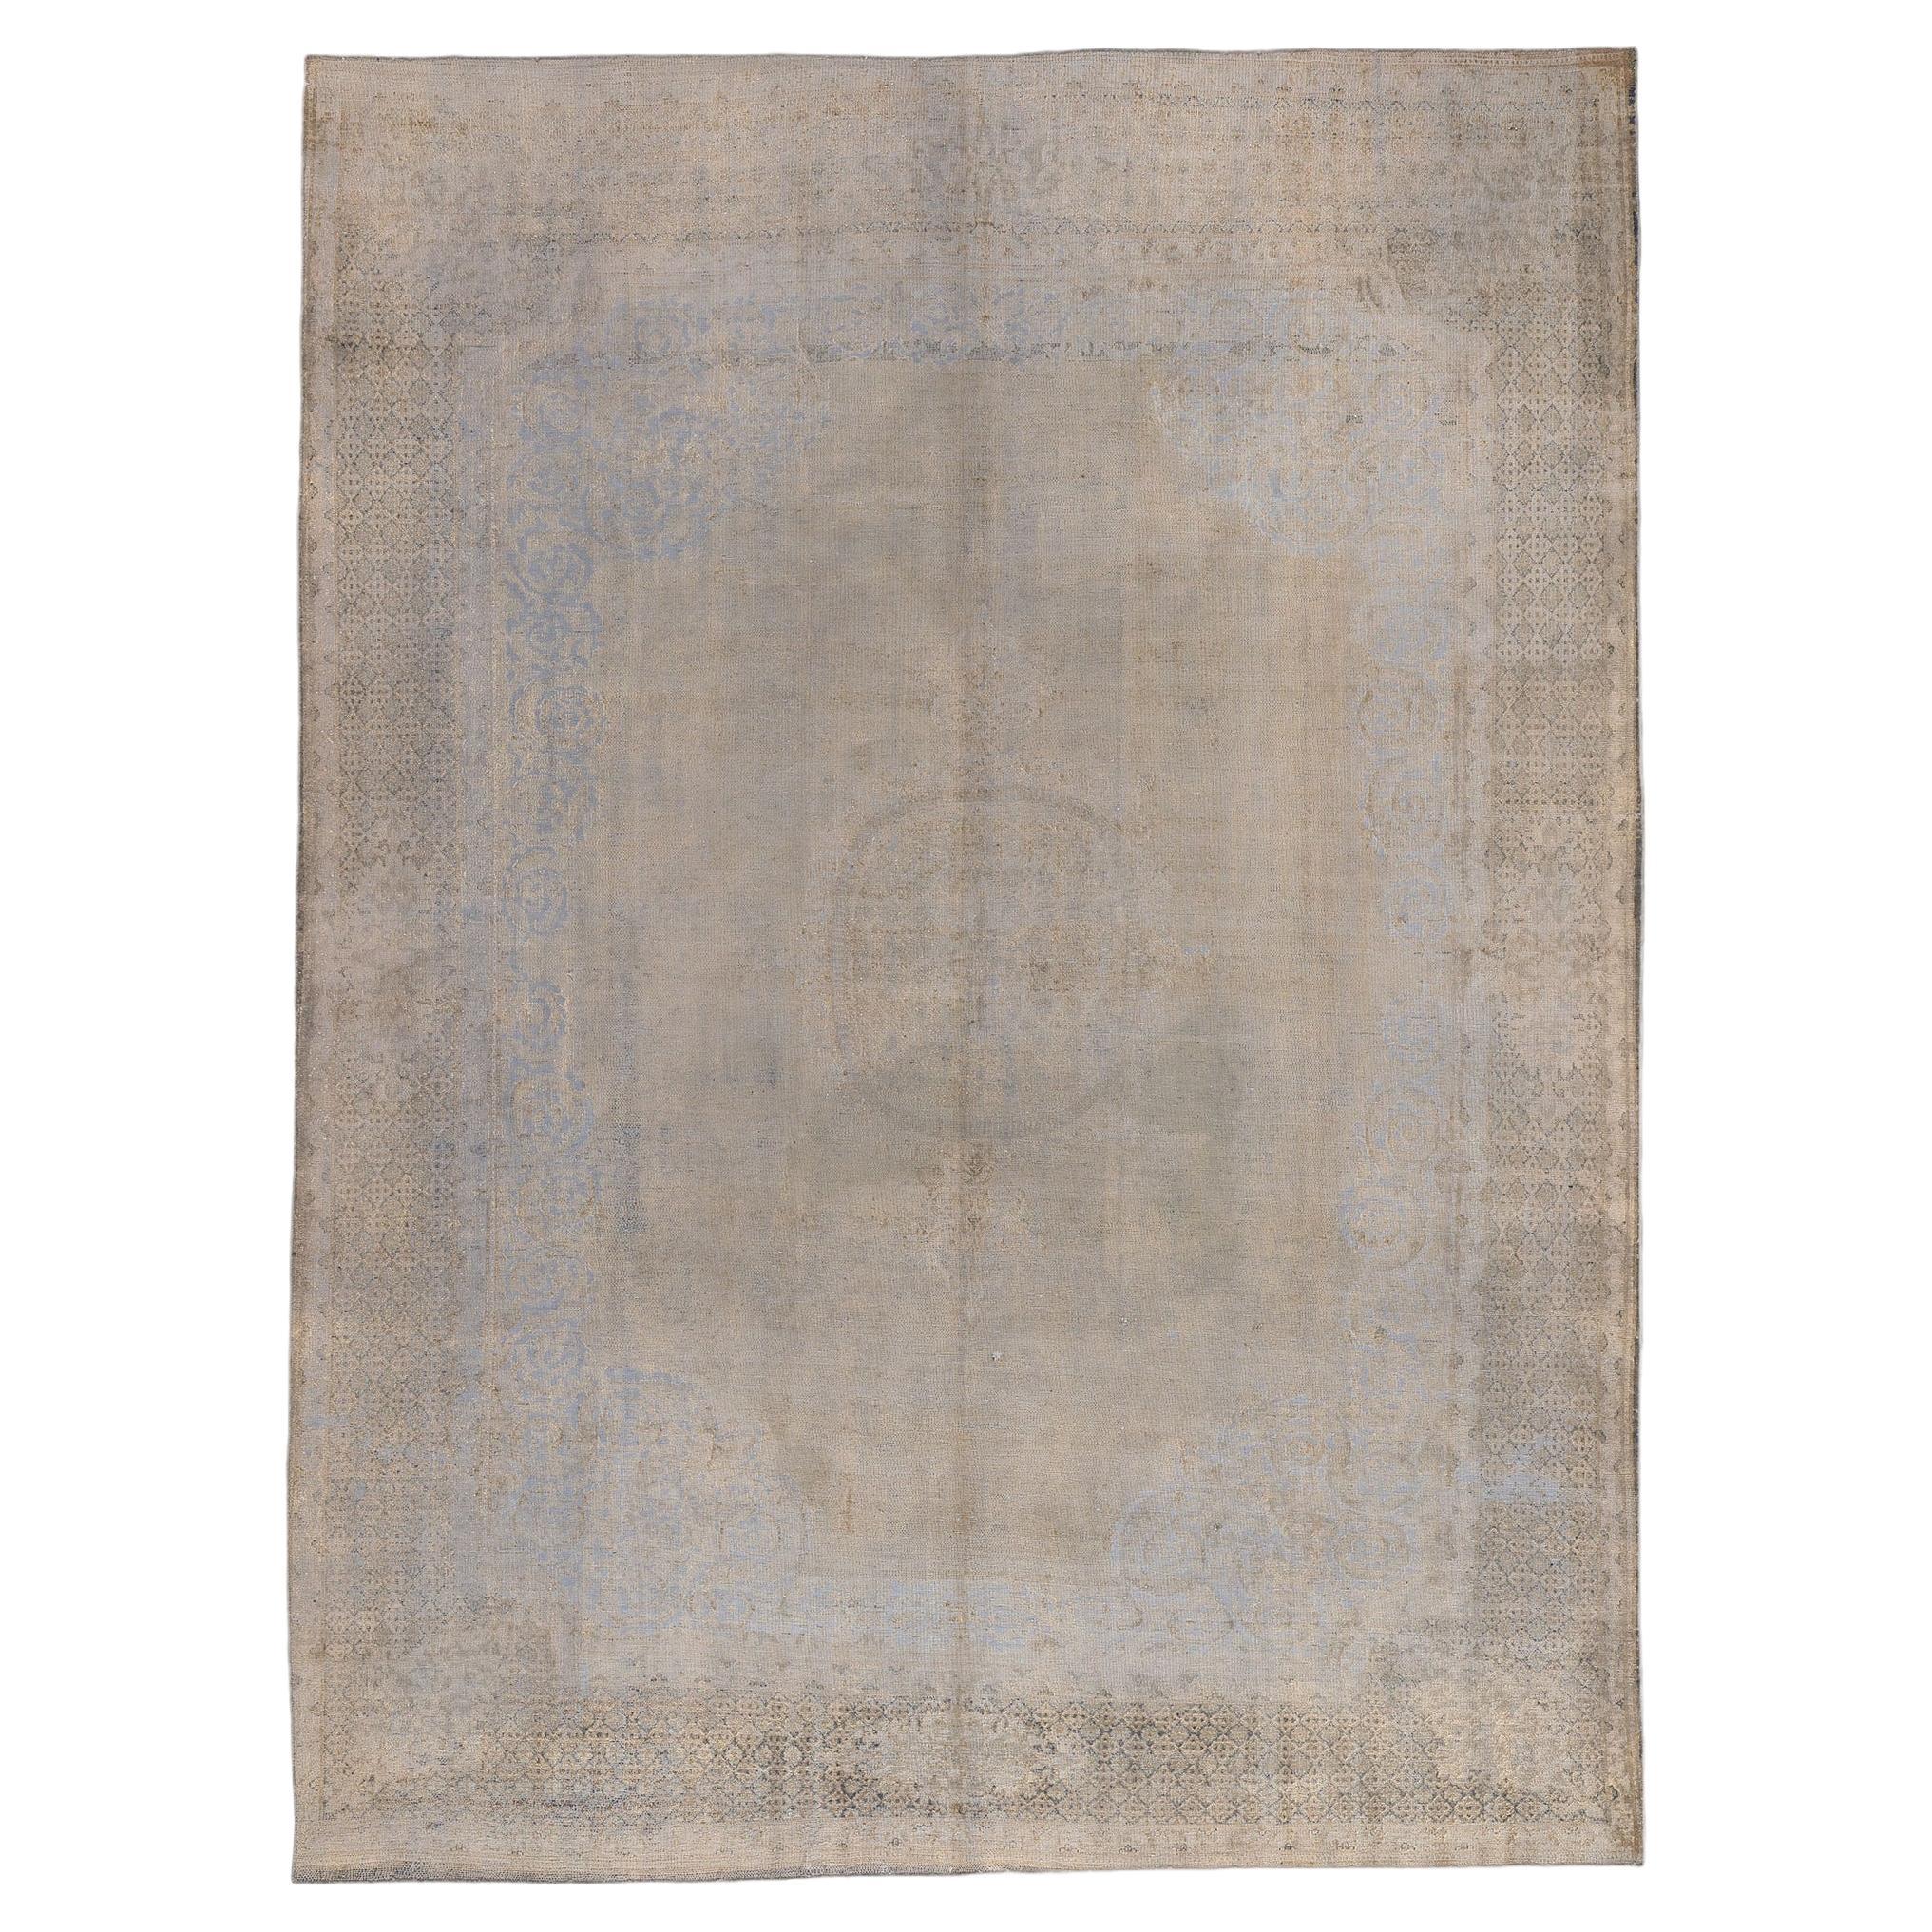 Vintage Turkish Overdyed Rug, French Industrial Meets Belgian Chic For Sale